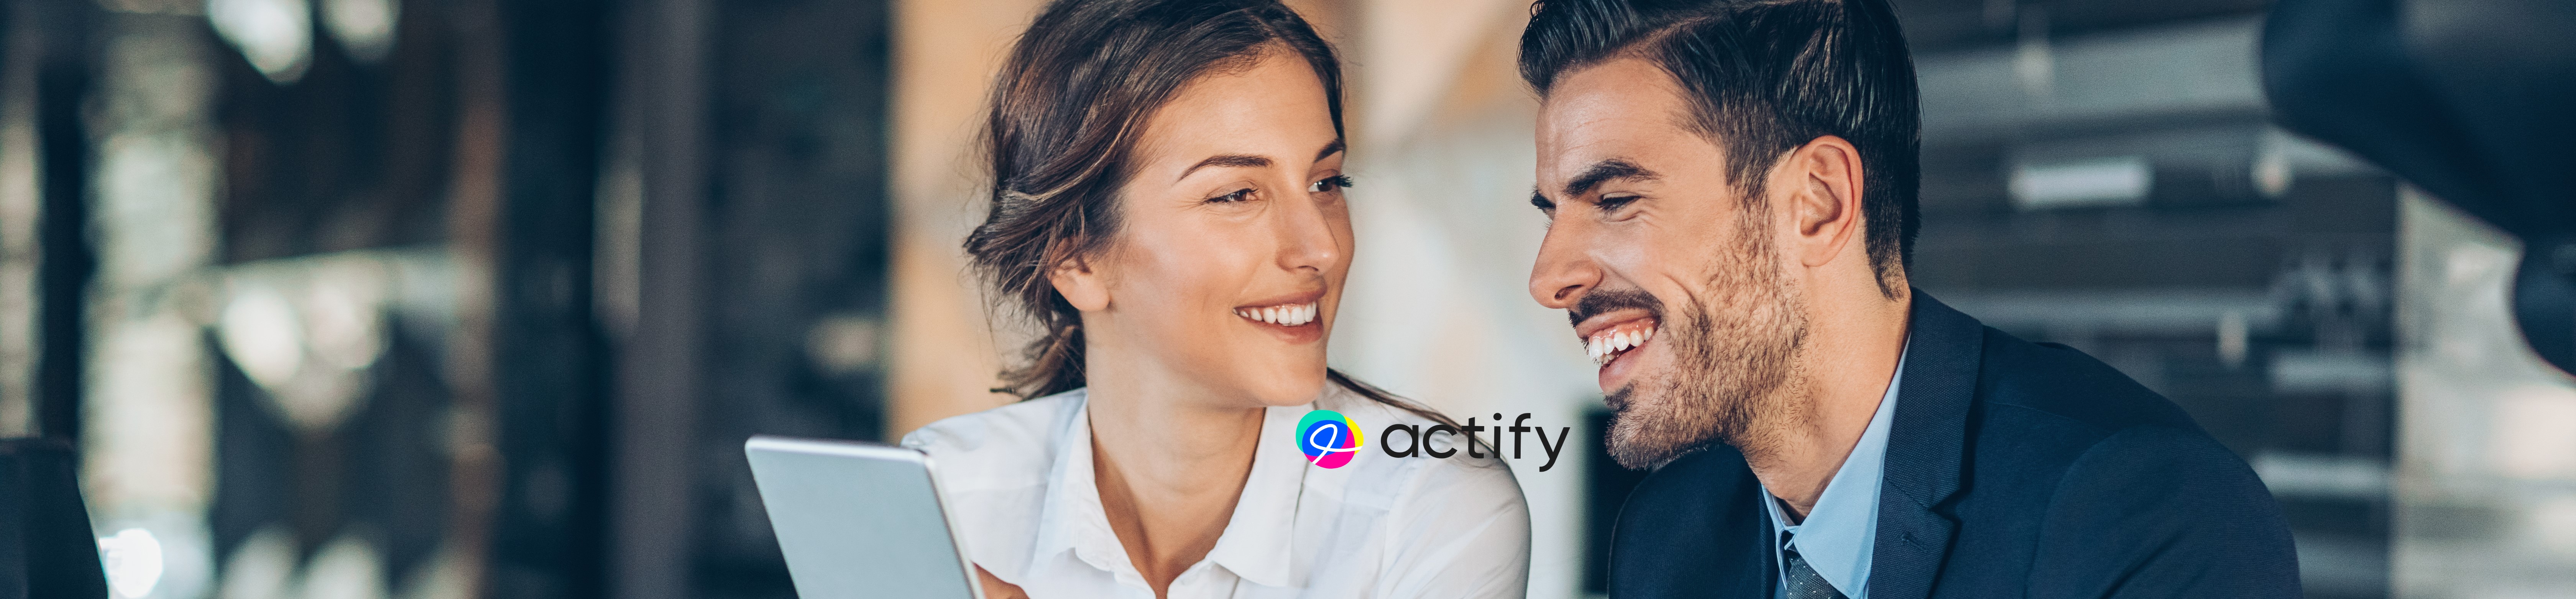 Product Owner Mobile App | Actify 